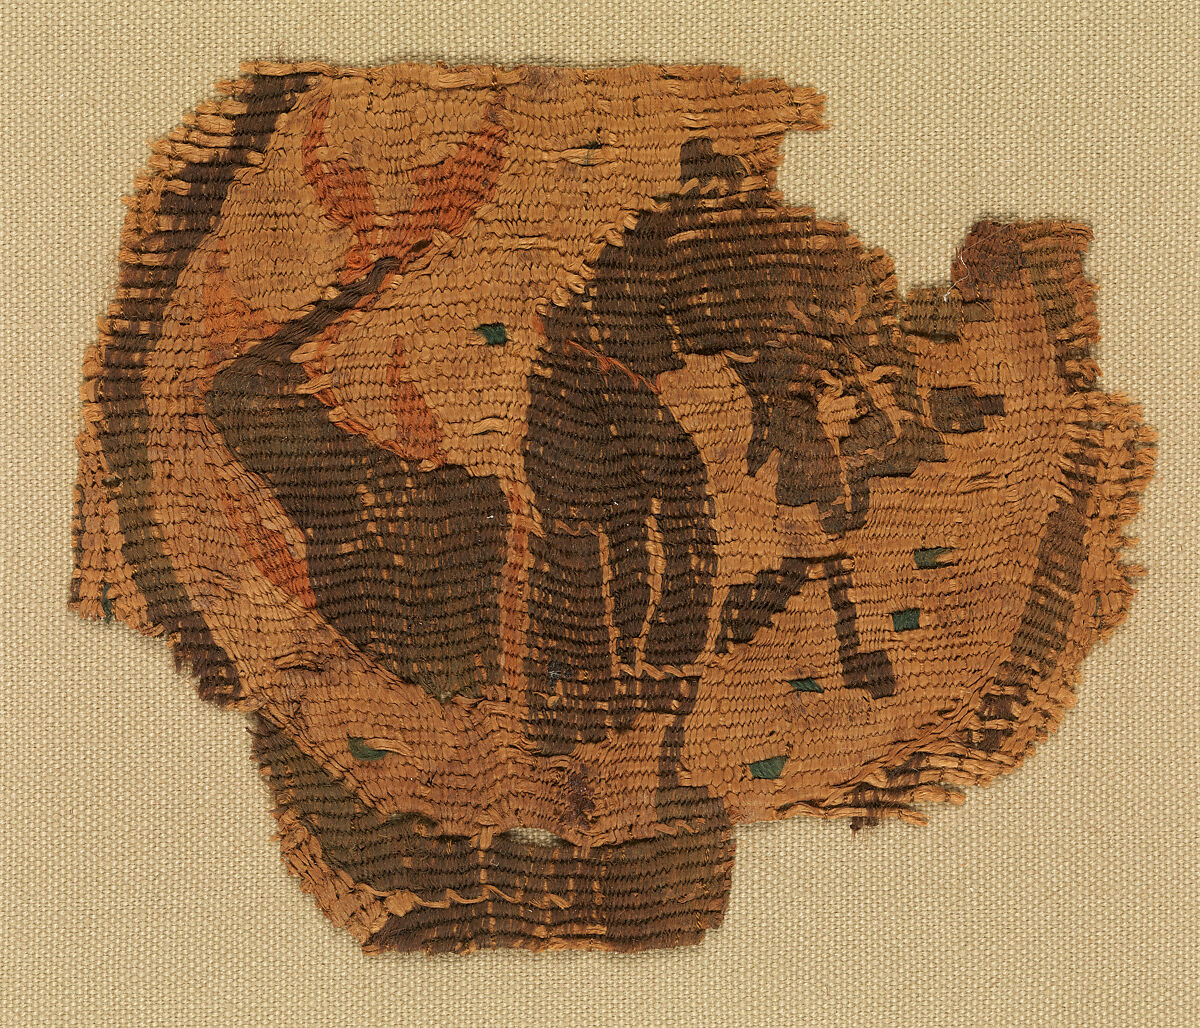 Roundel with Fish-Tailed Monster, Wool and linen; tapestry woven 